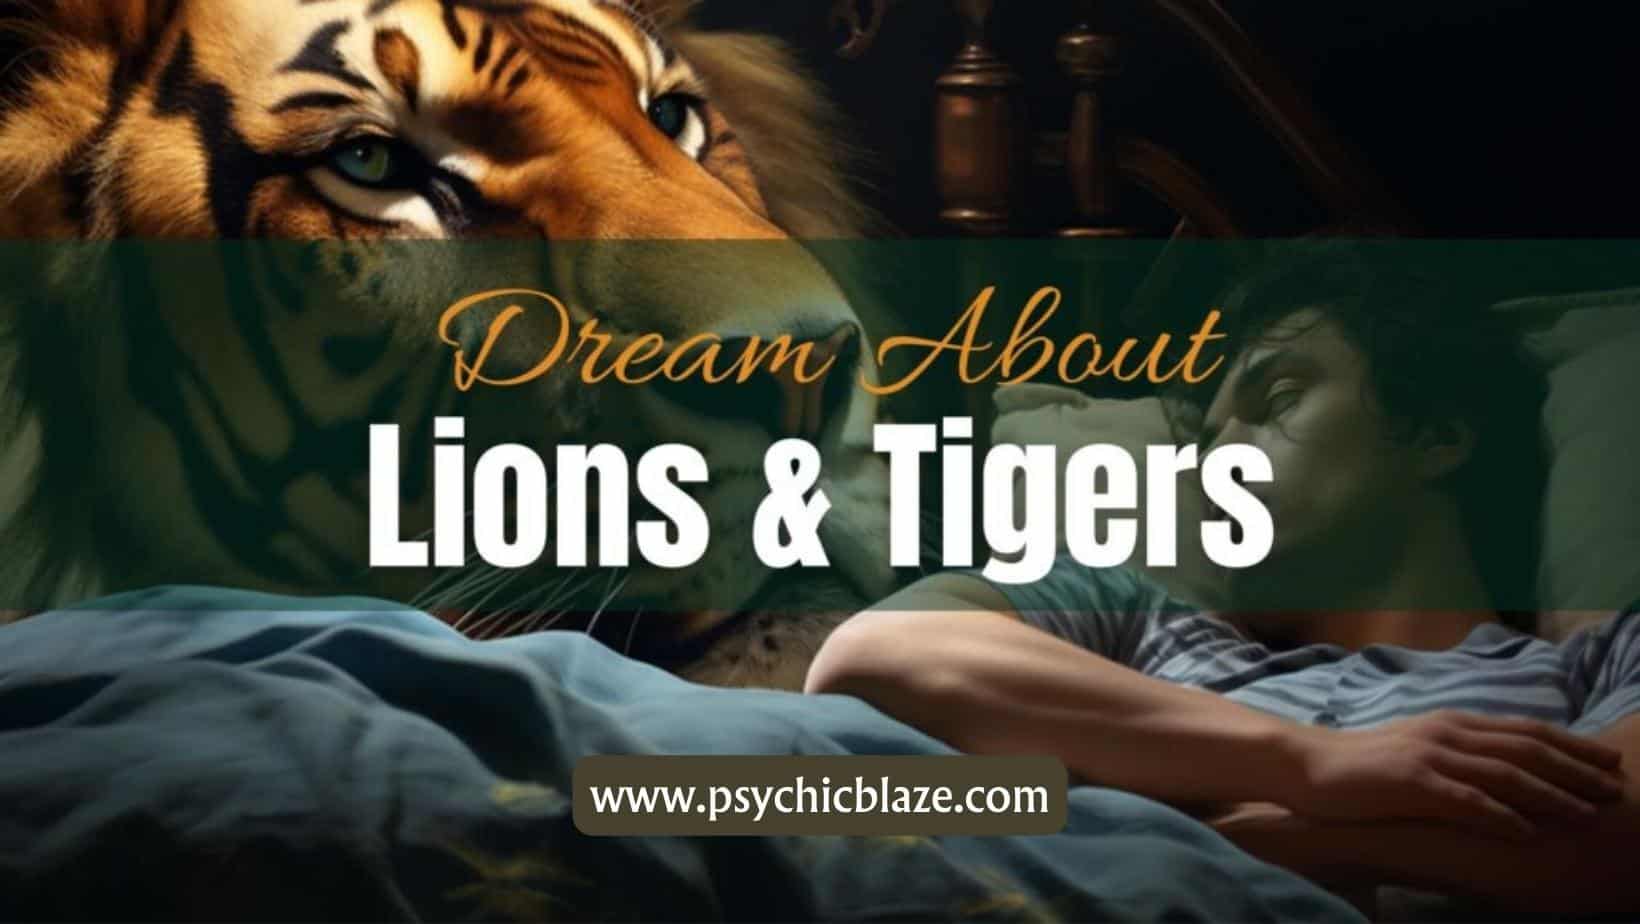 Dream about Lions & Tigers